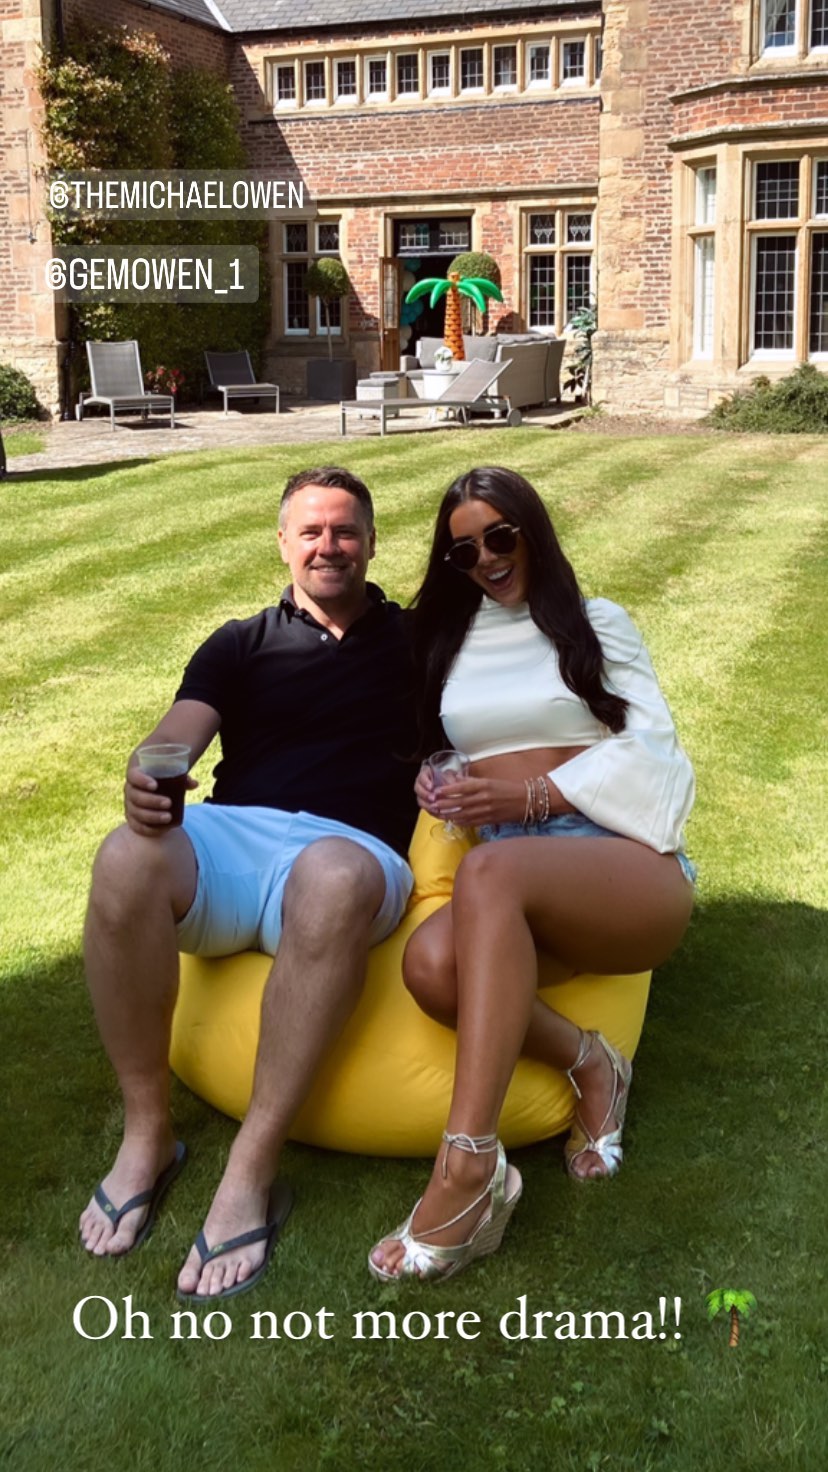 Gemma Owen reunites with dad Michael Owen since leaving the villa – who surprises her with a ‘cursed’ yellow beanbag